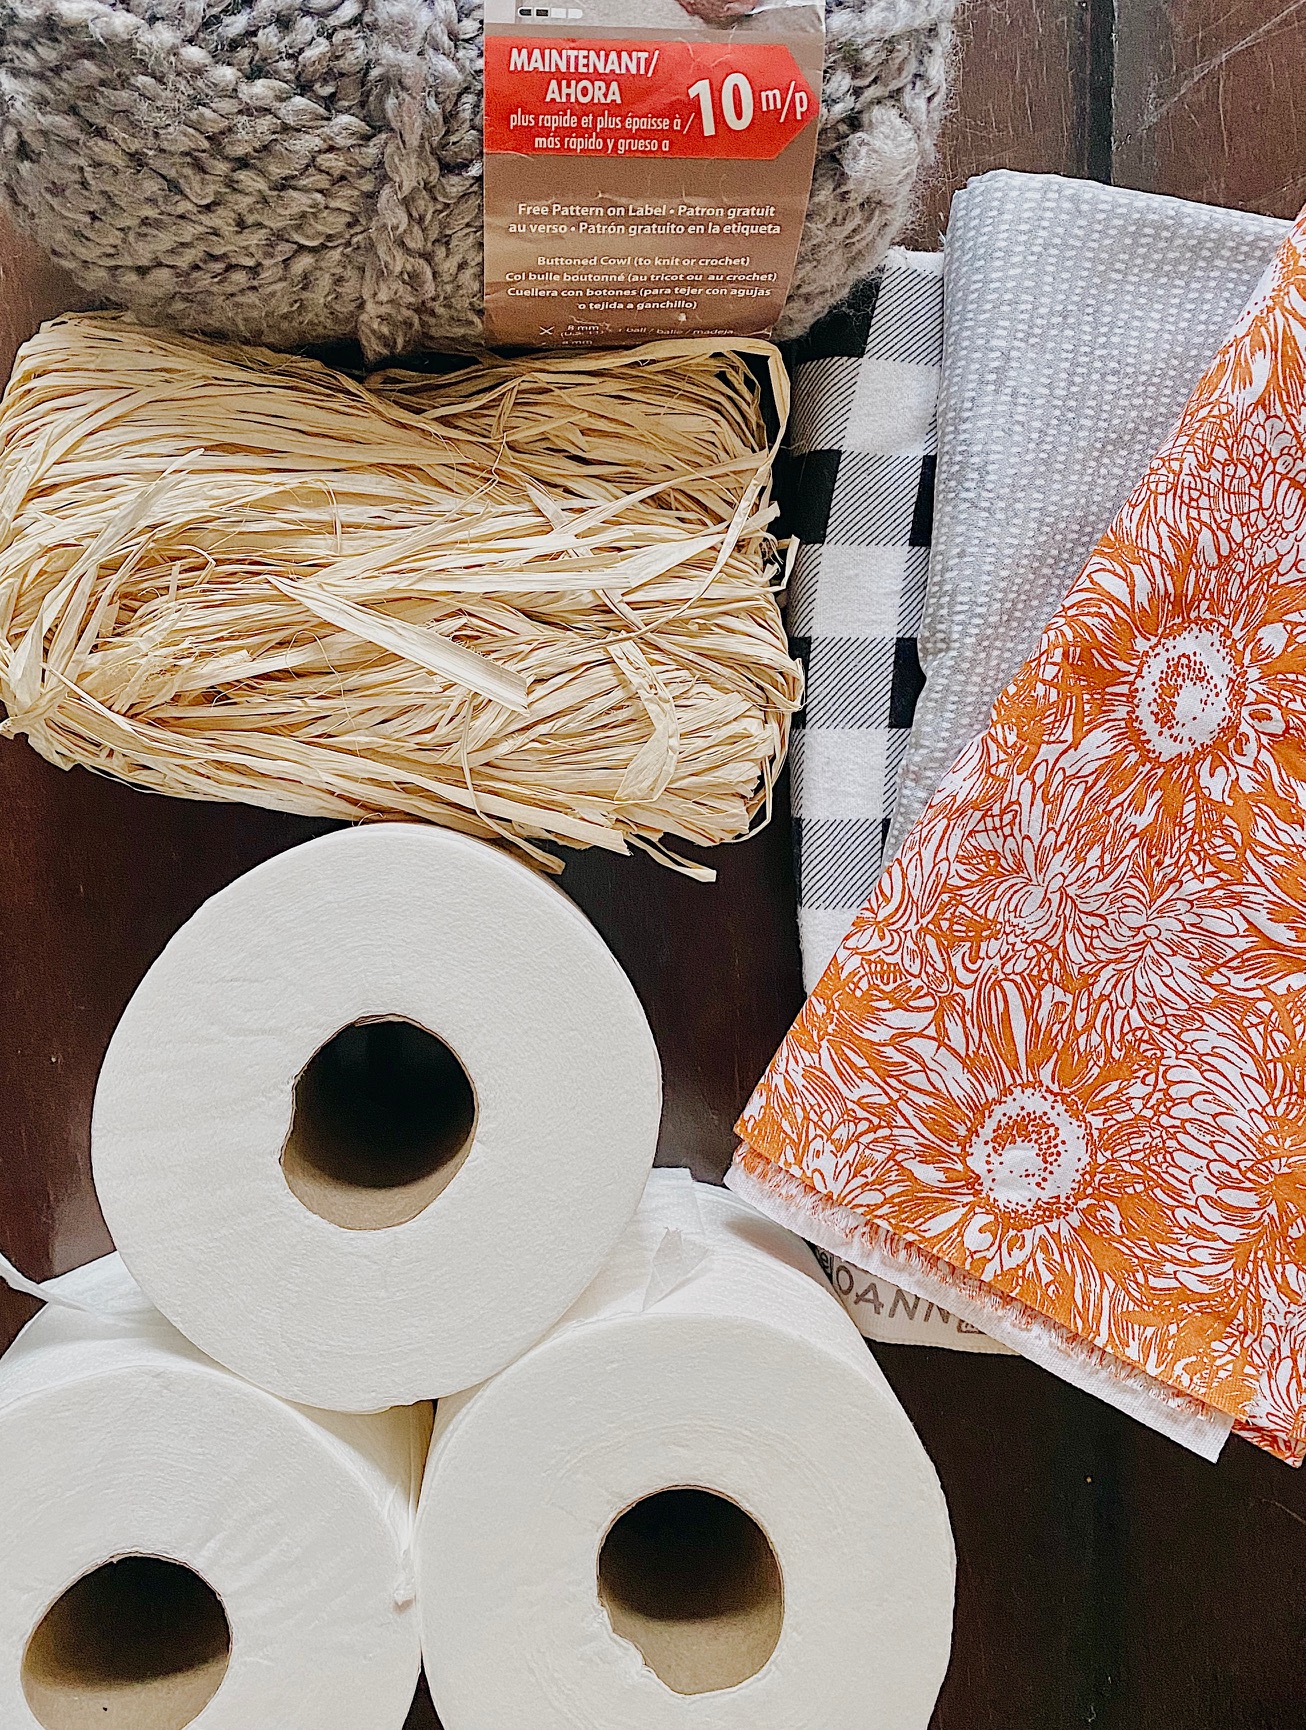 5 JOANN Fall Crafts featured by top AL home decor blogger, She Gave It A Go